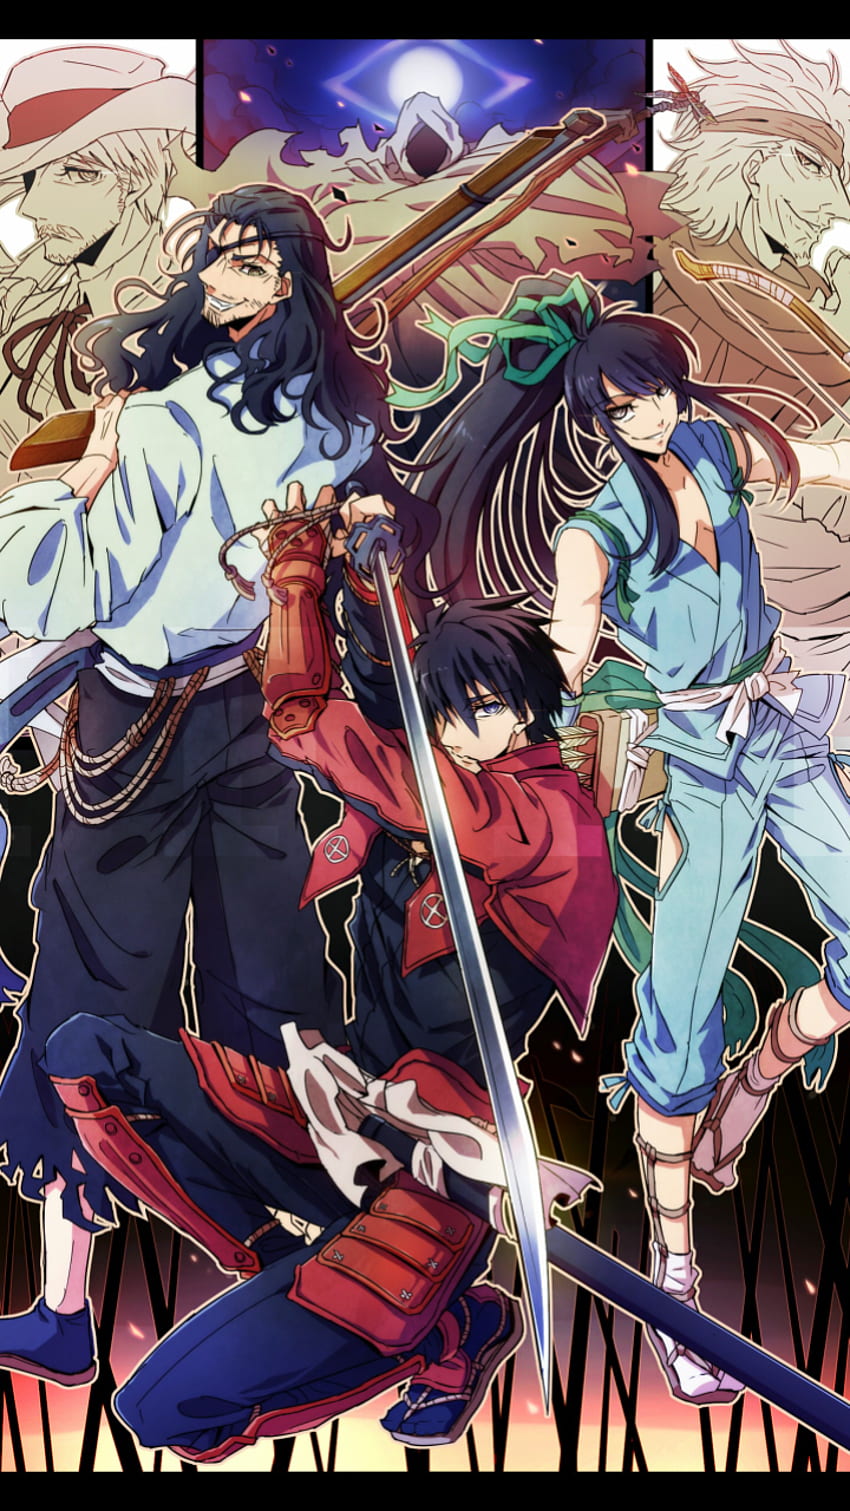 Drifters Season 2 Release Date OVA Confirmed For Anime Drifters Manga  Volumes In English Announced By Dark Horse Comics For 2017  Steemit